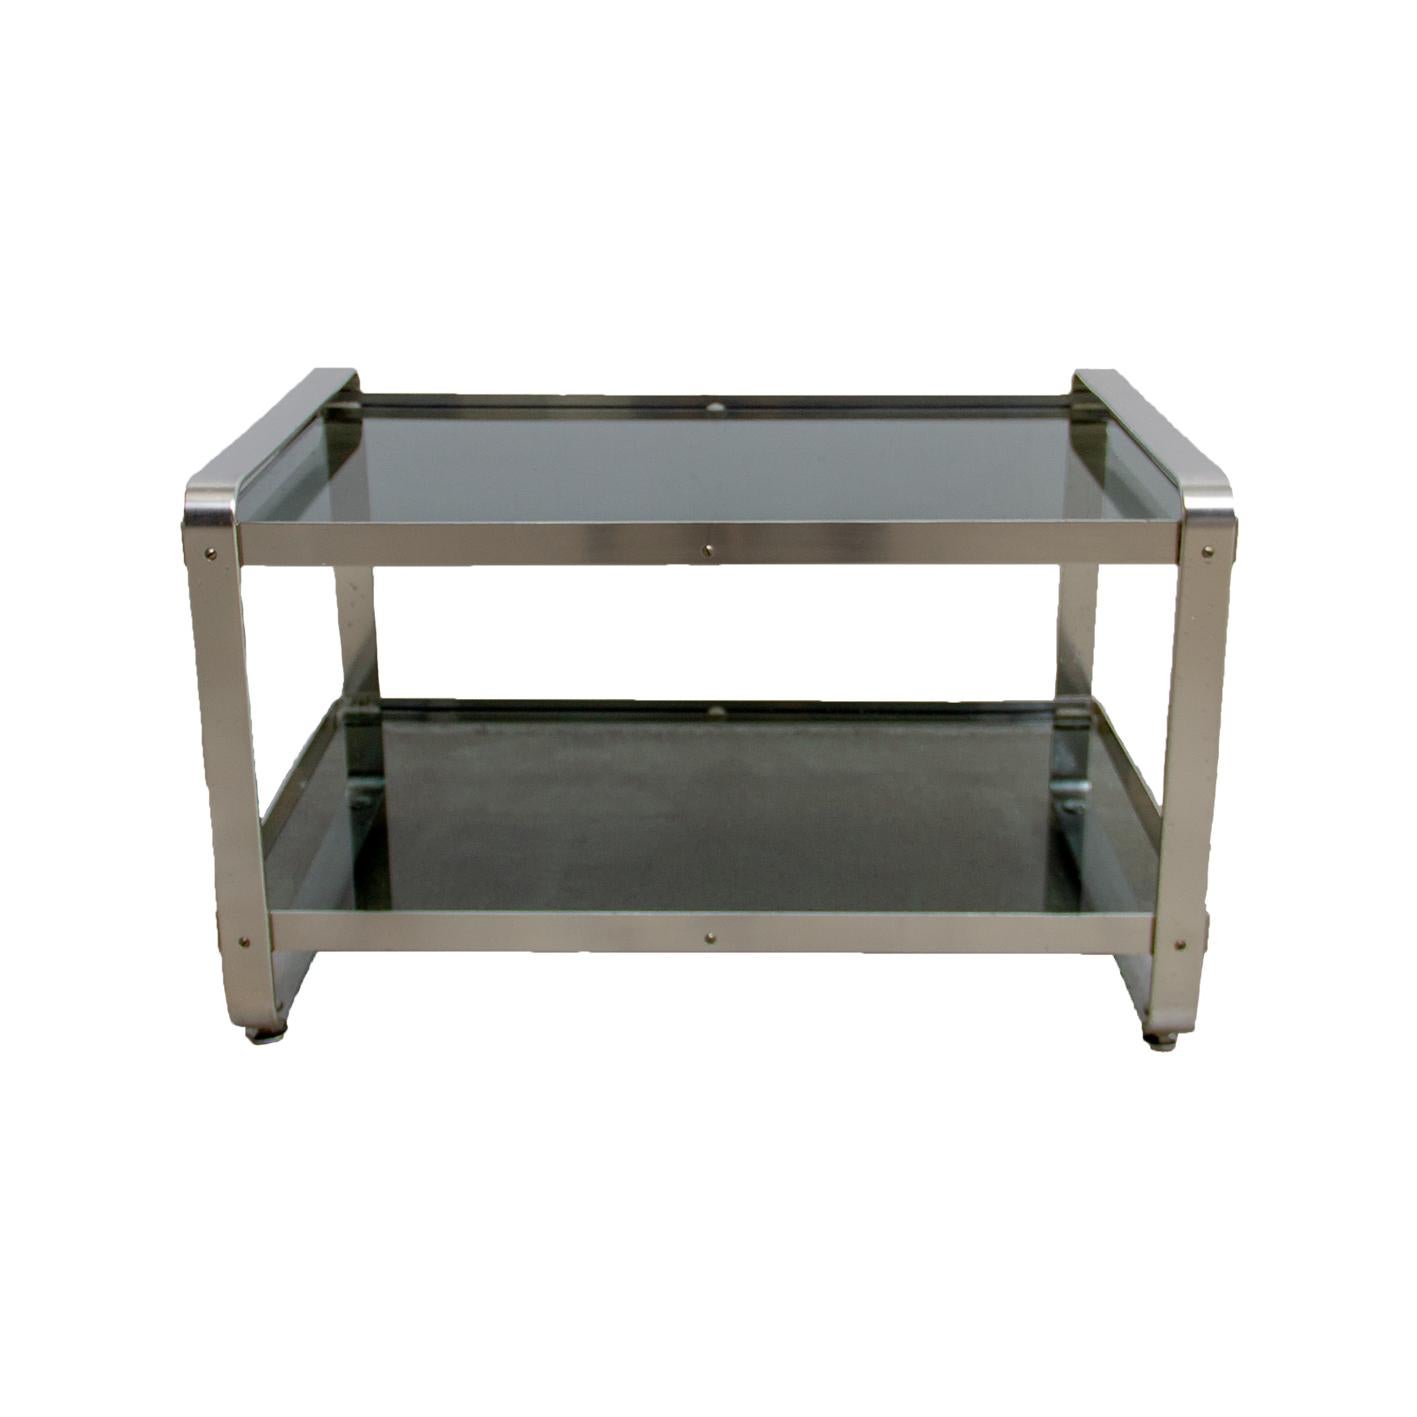 1970s Two Layer Smoke Glass Top Anodized Aluminium Framed Side Table